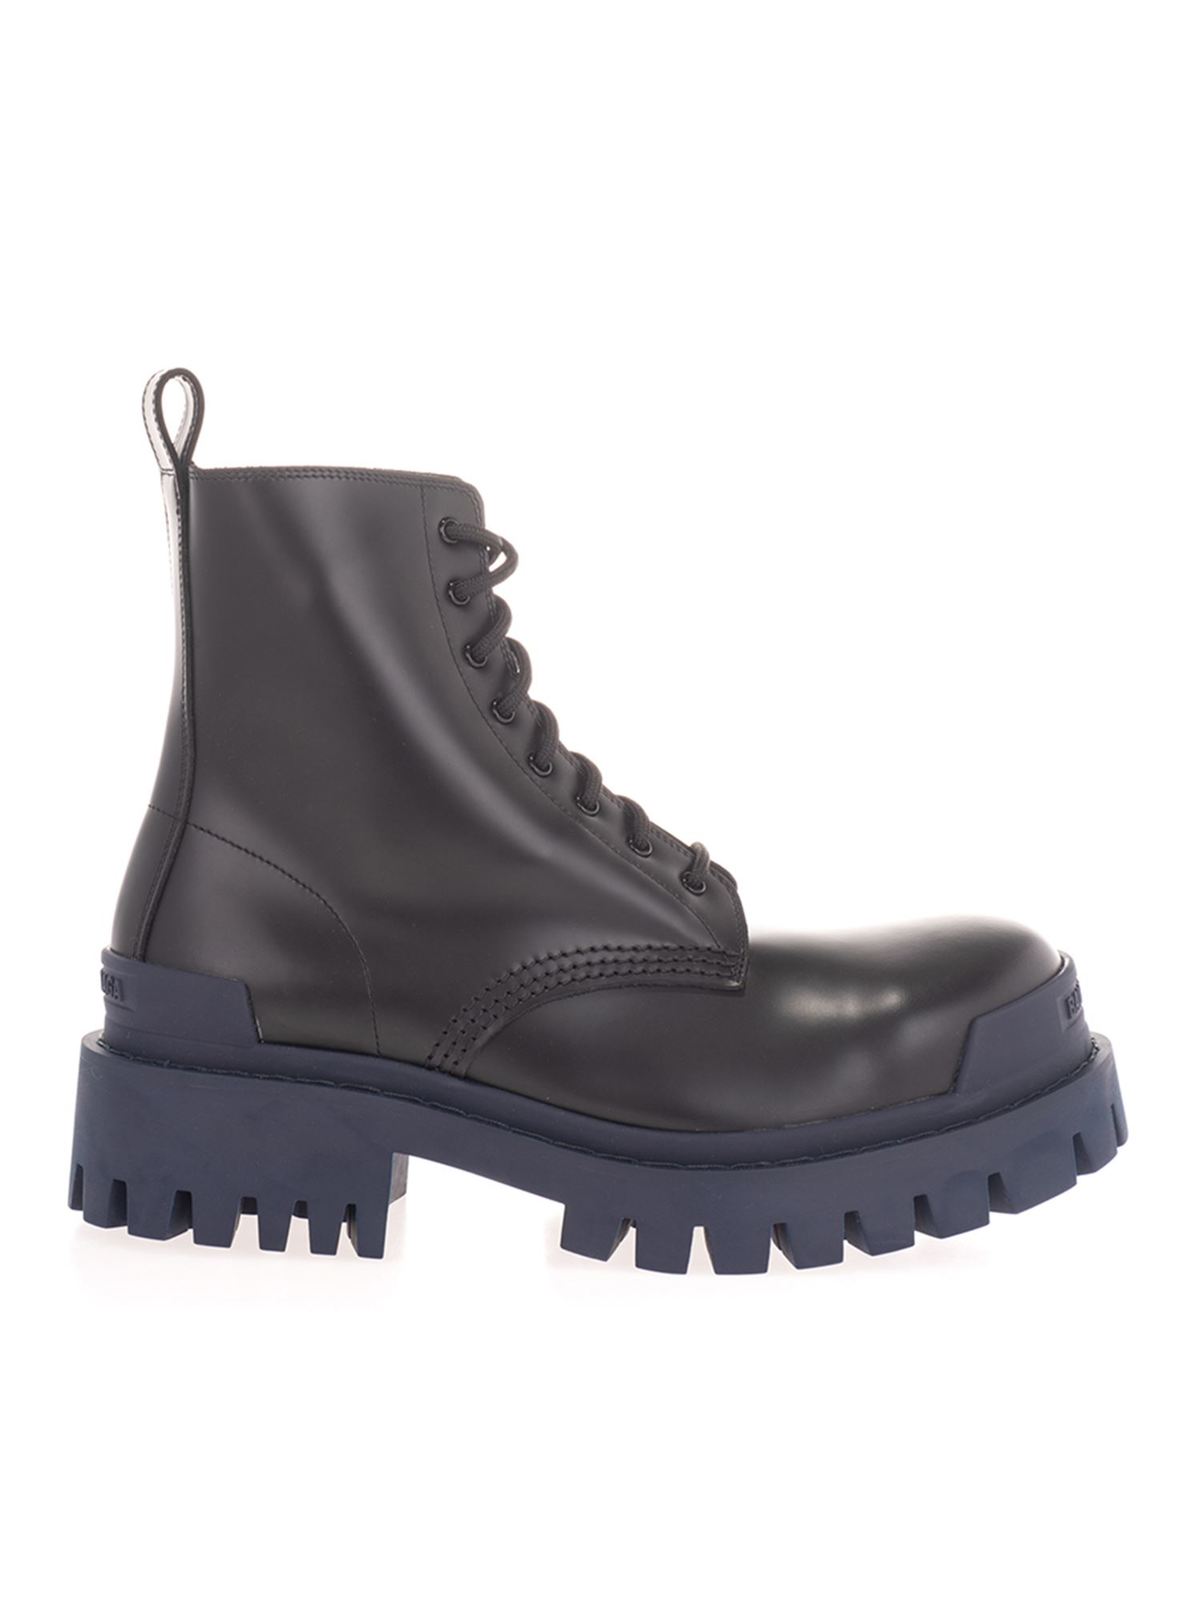 Ankle boots Balenciaga - Tractor boots in black and navy blue ...